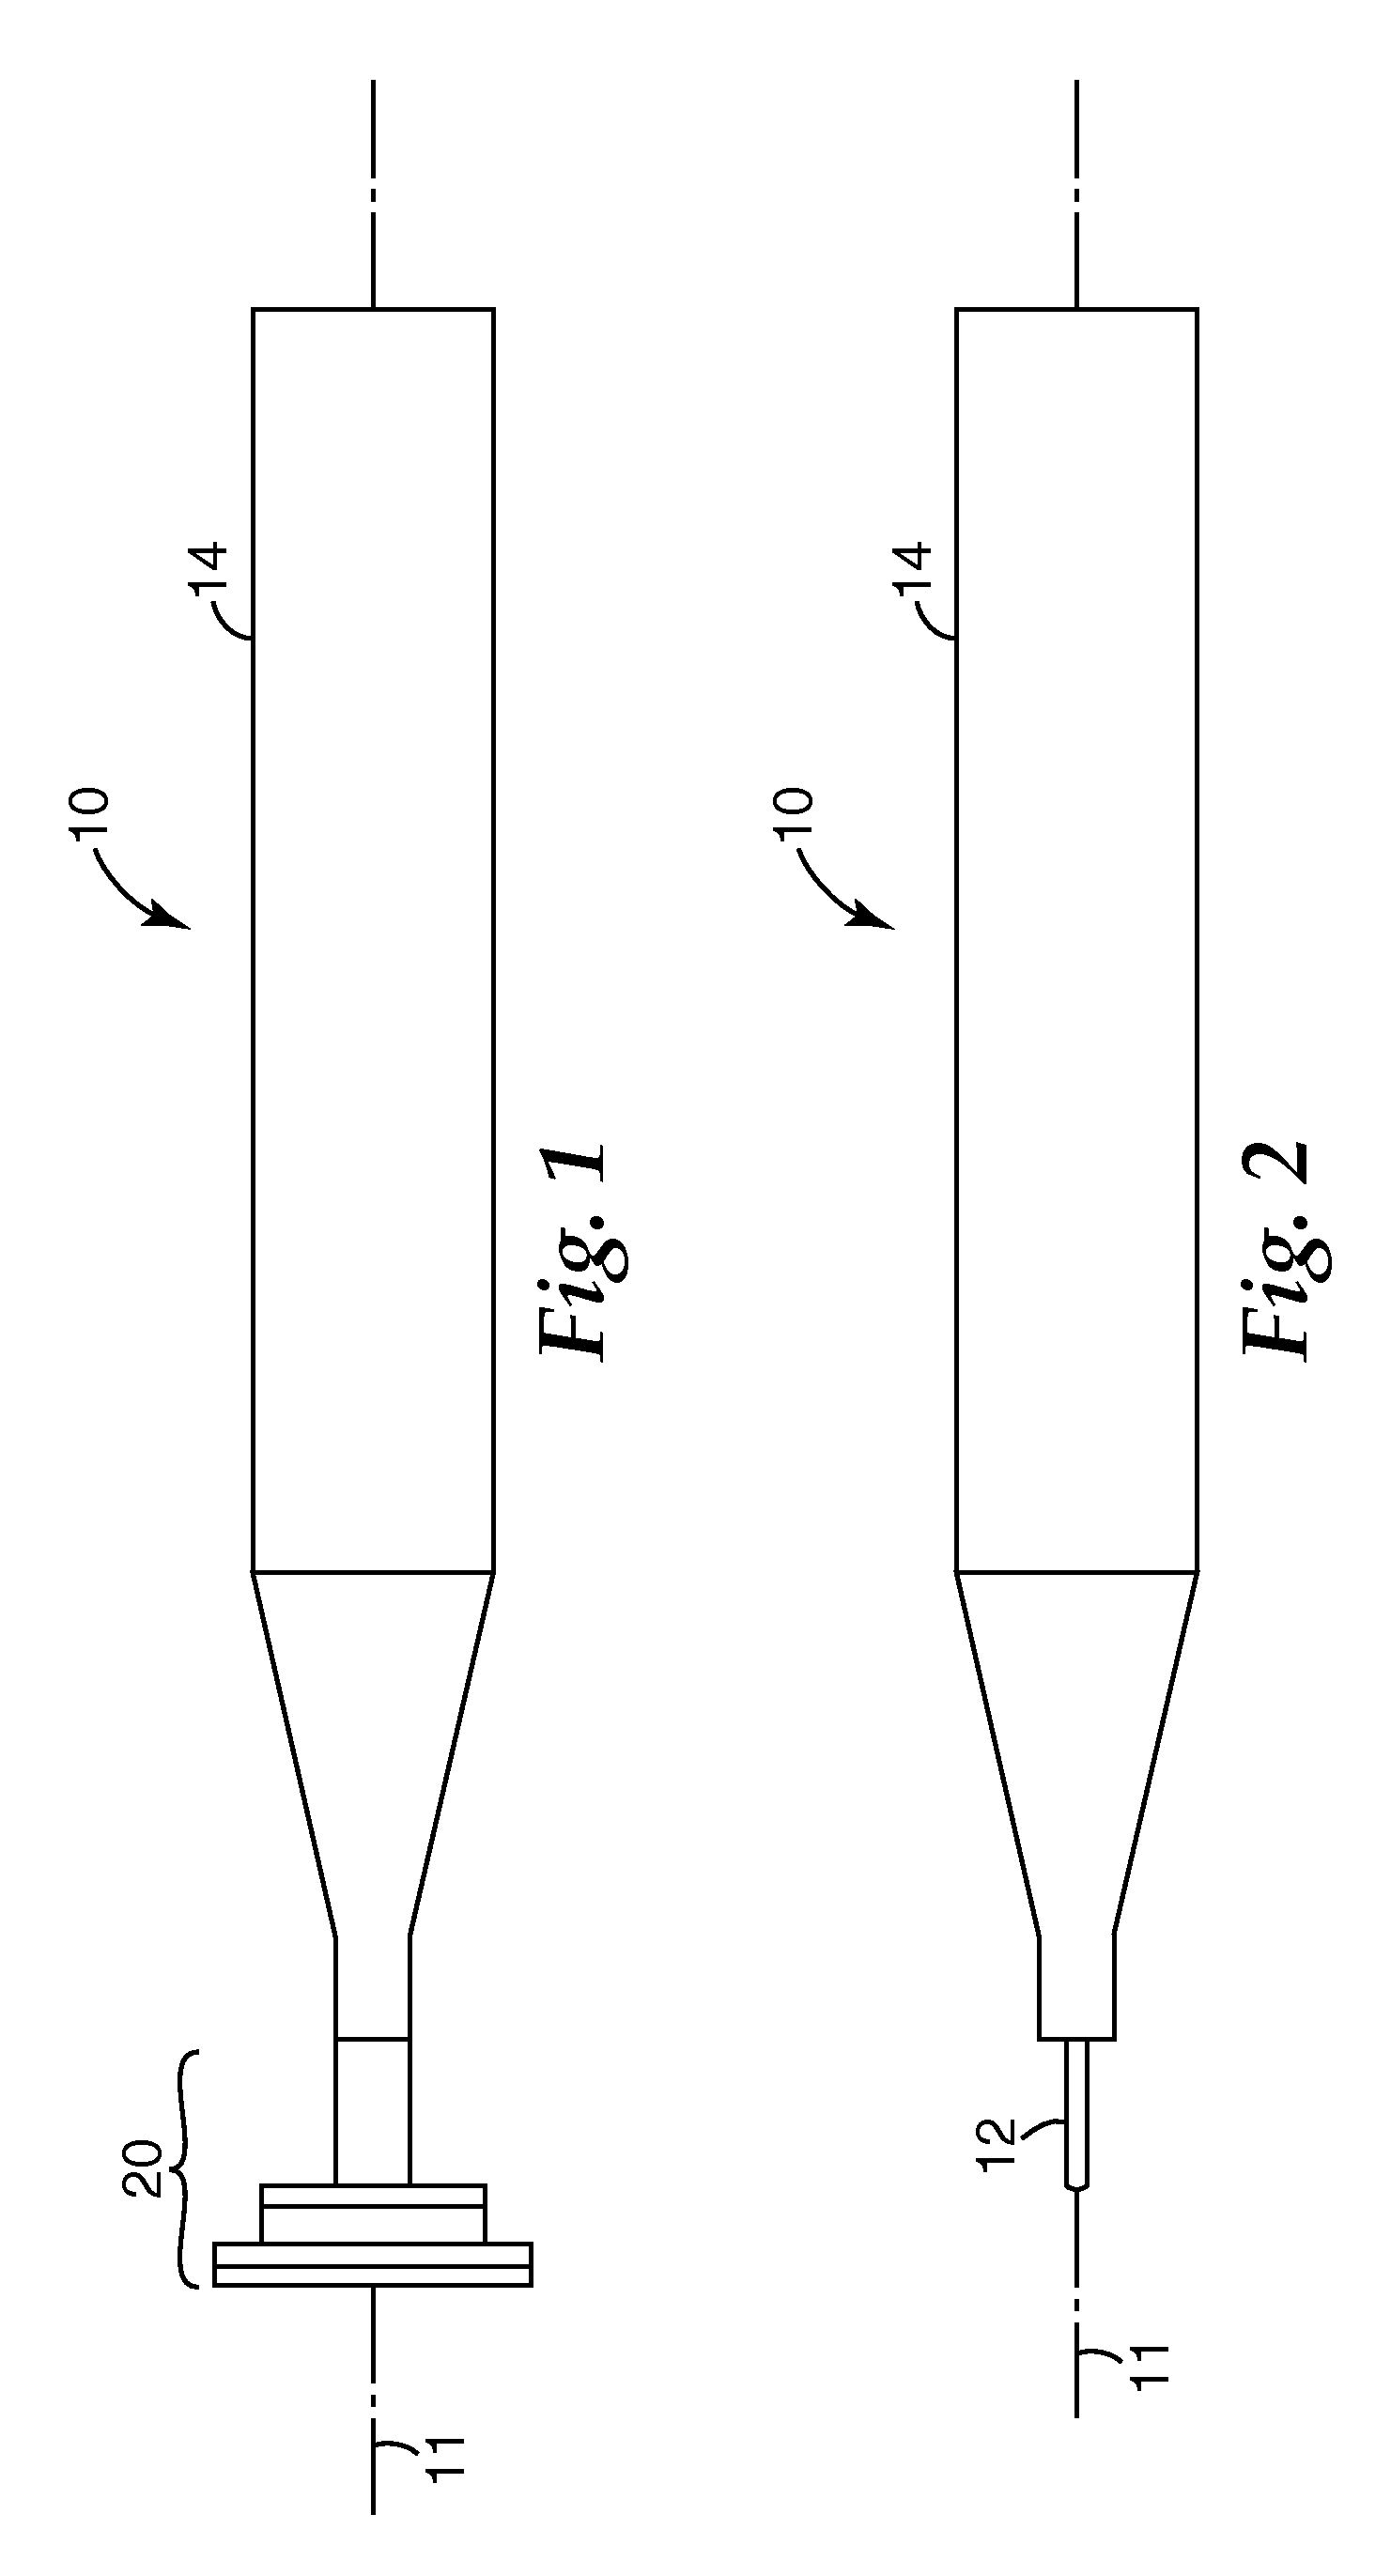 Methods of removing defects in surfaces